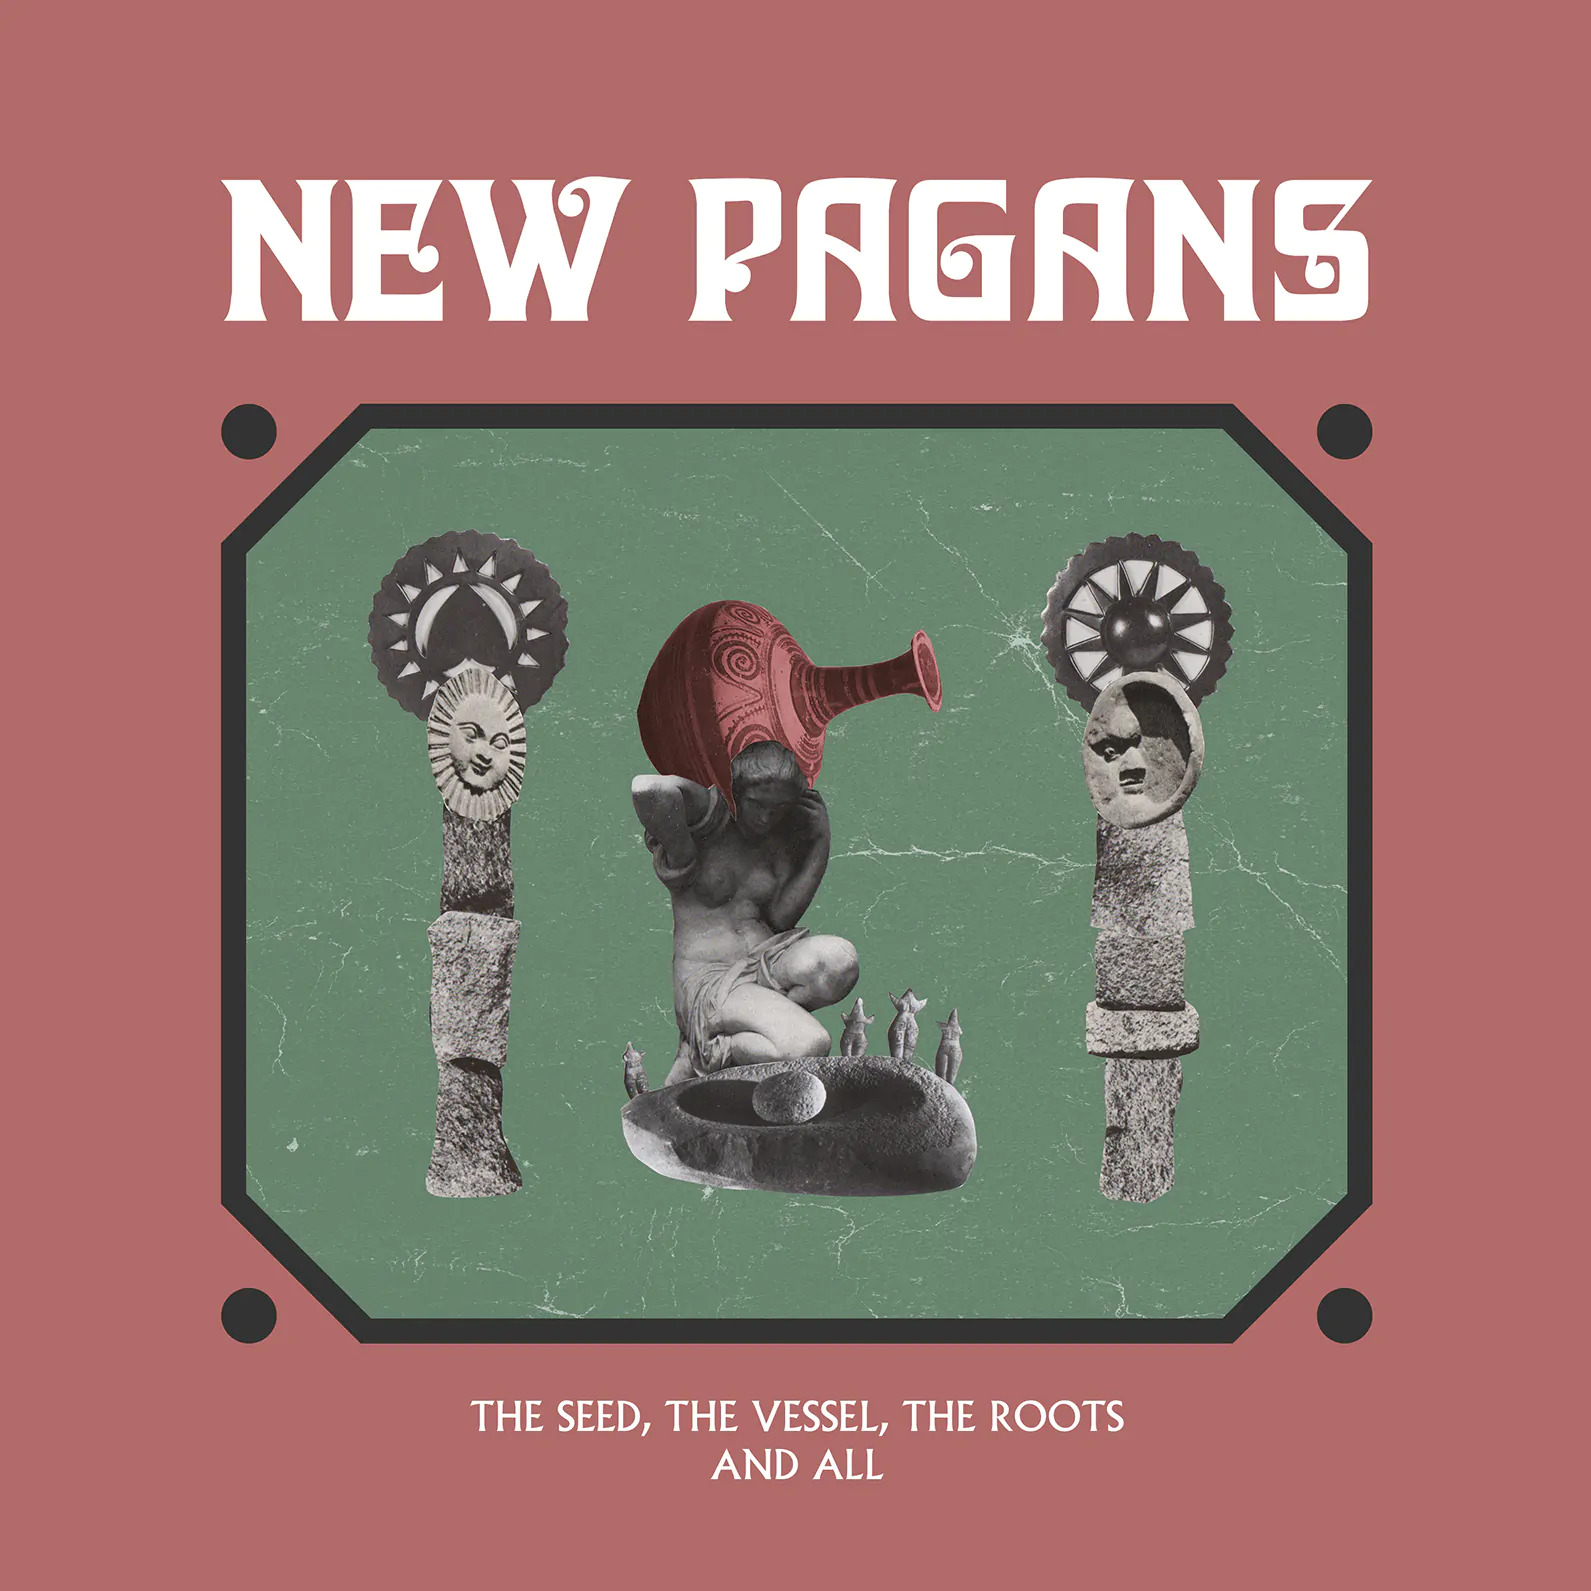 ALBUM REVIEW: New Pagans – The Seed, The Vessel, The Roots and All